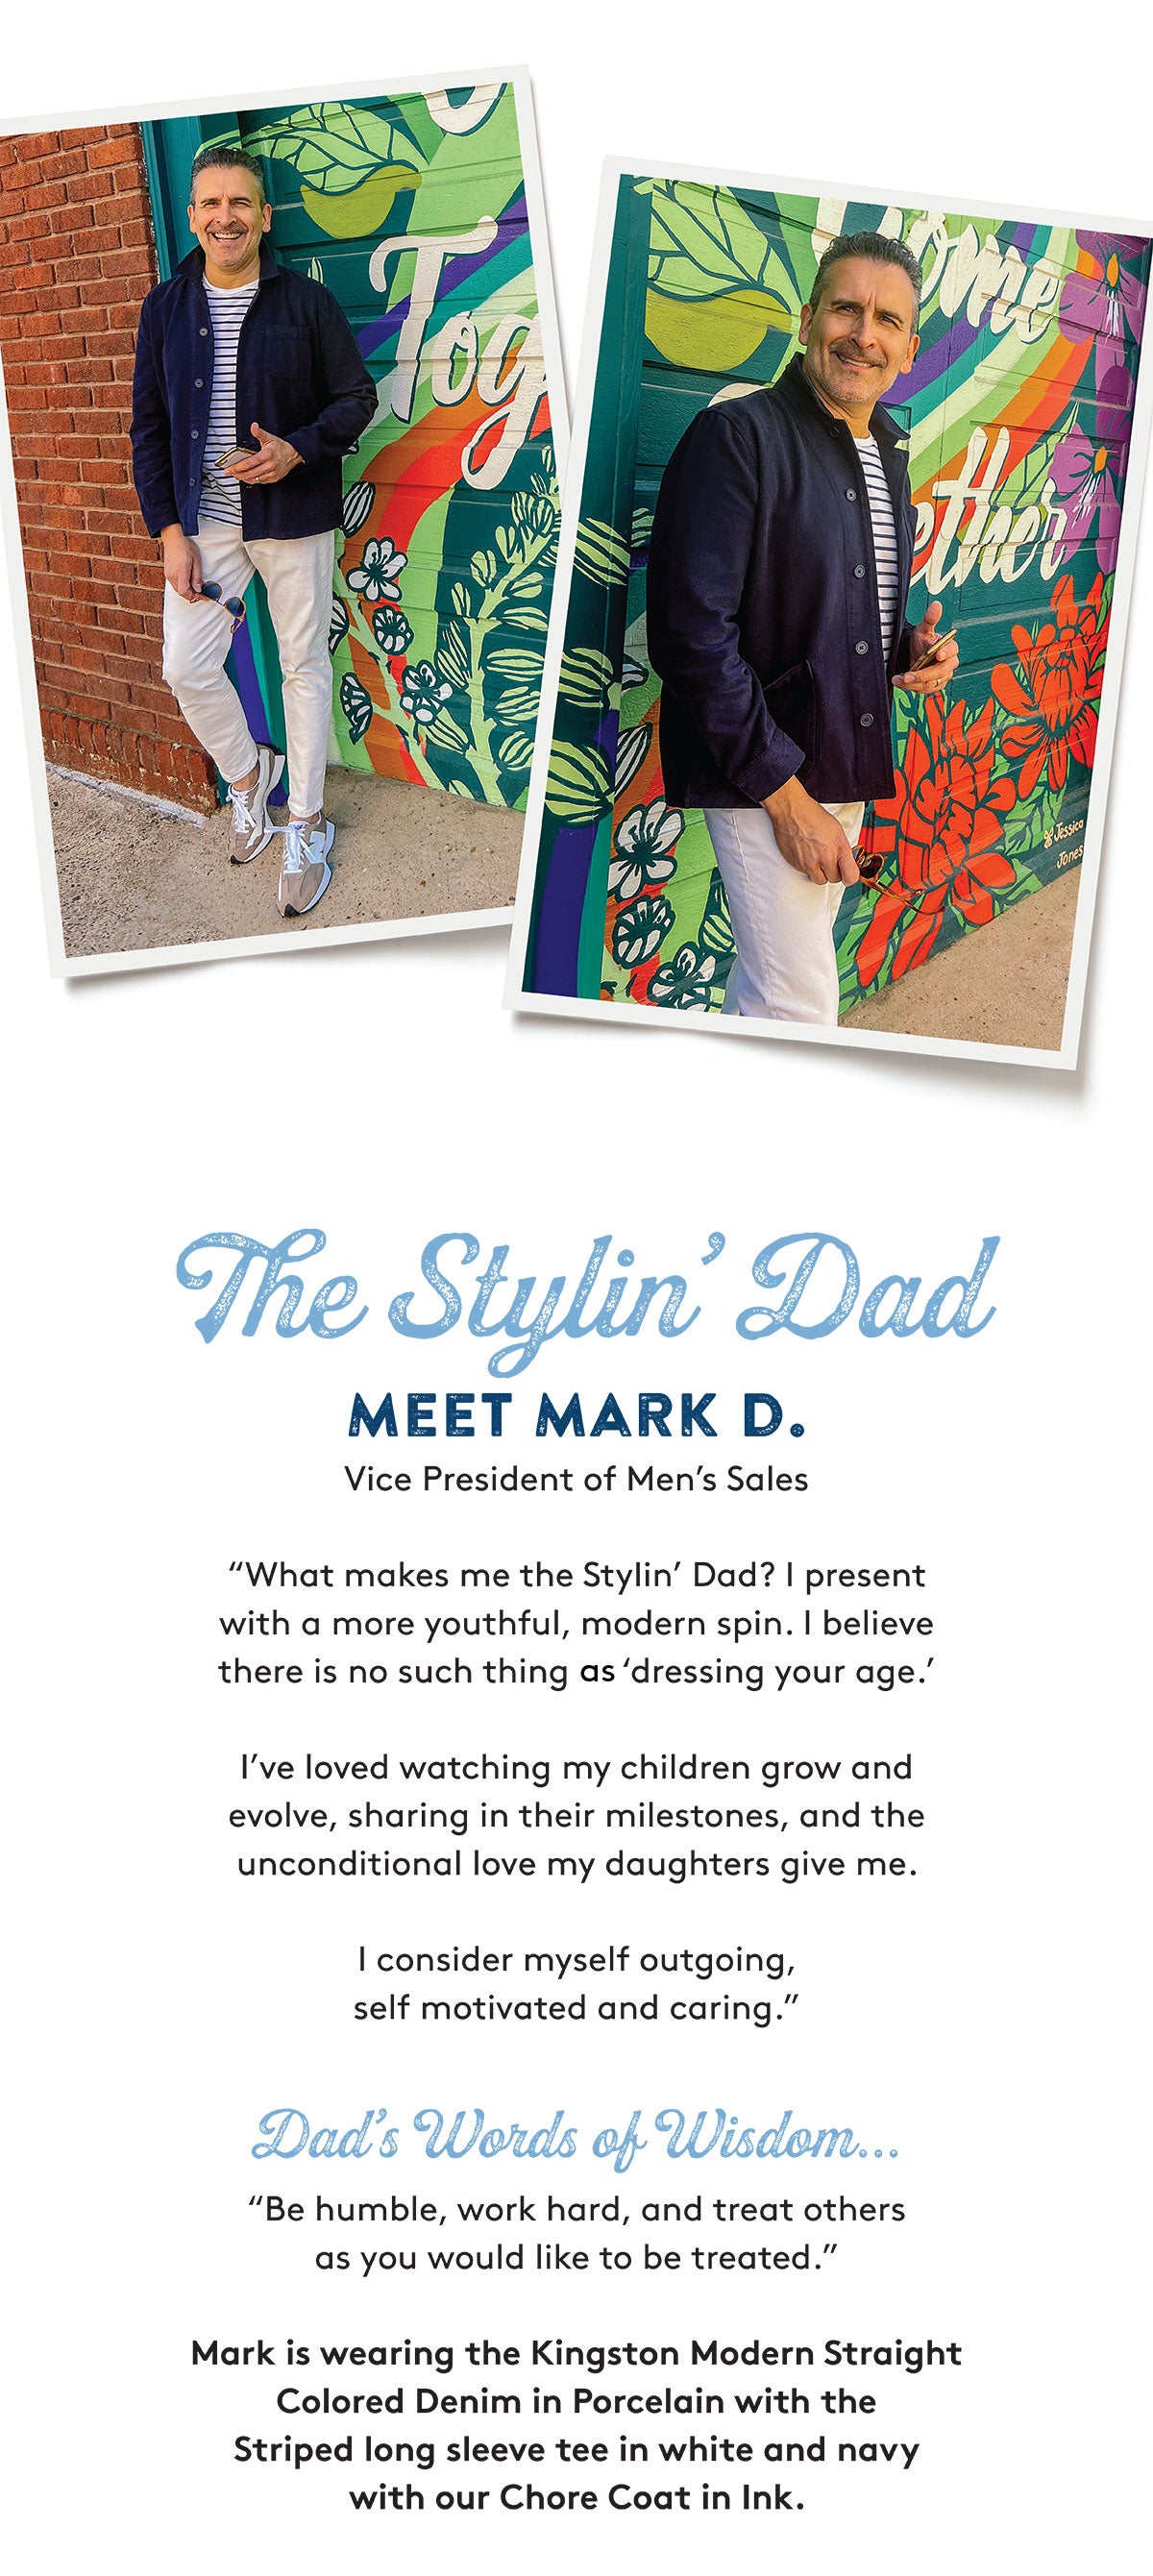 The Stylin' Dad MEET MARK D. Vice President of Men's Sales "What makes me the Stylin' Dad? I present with a more youthful, modern spin. I believe there is no such thing as 'dressing your age I've loved watching my children grow and evolve, sharing in their milestones, and the unconditional love my daughters give me. I consider myself outgoing, self motivated and caring. Dad's Words of Wisdon... "Be humble, work hard, and treat others as you would like to be treated. Mark is wearing the Kingston Modern Straight Colored Denim in Porcelain with the Striped long sleeve tee in white and navy with our Chore Coat in Ink.